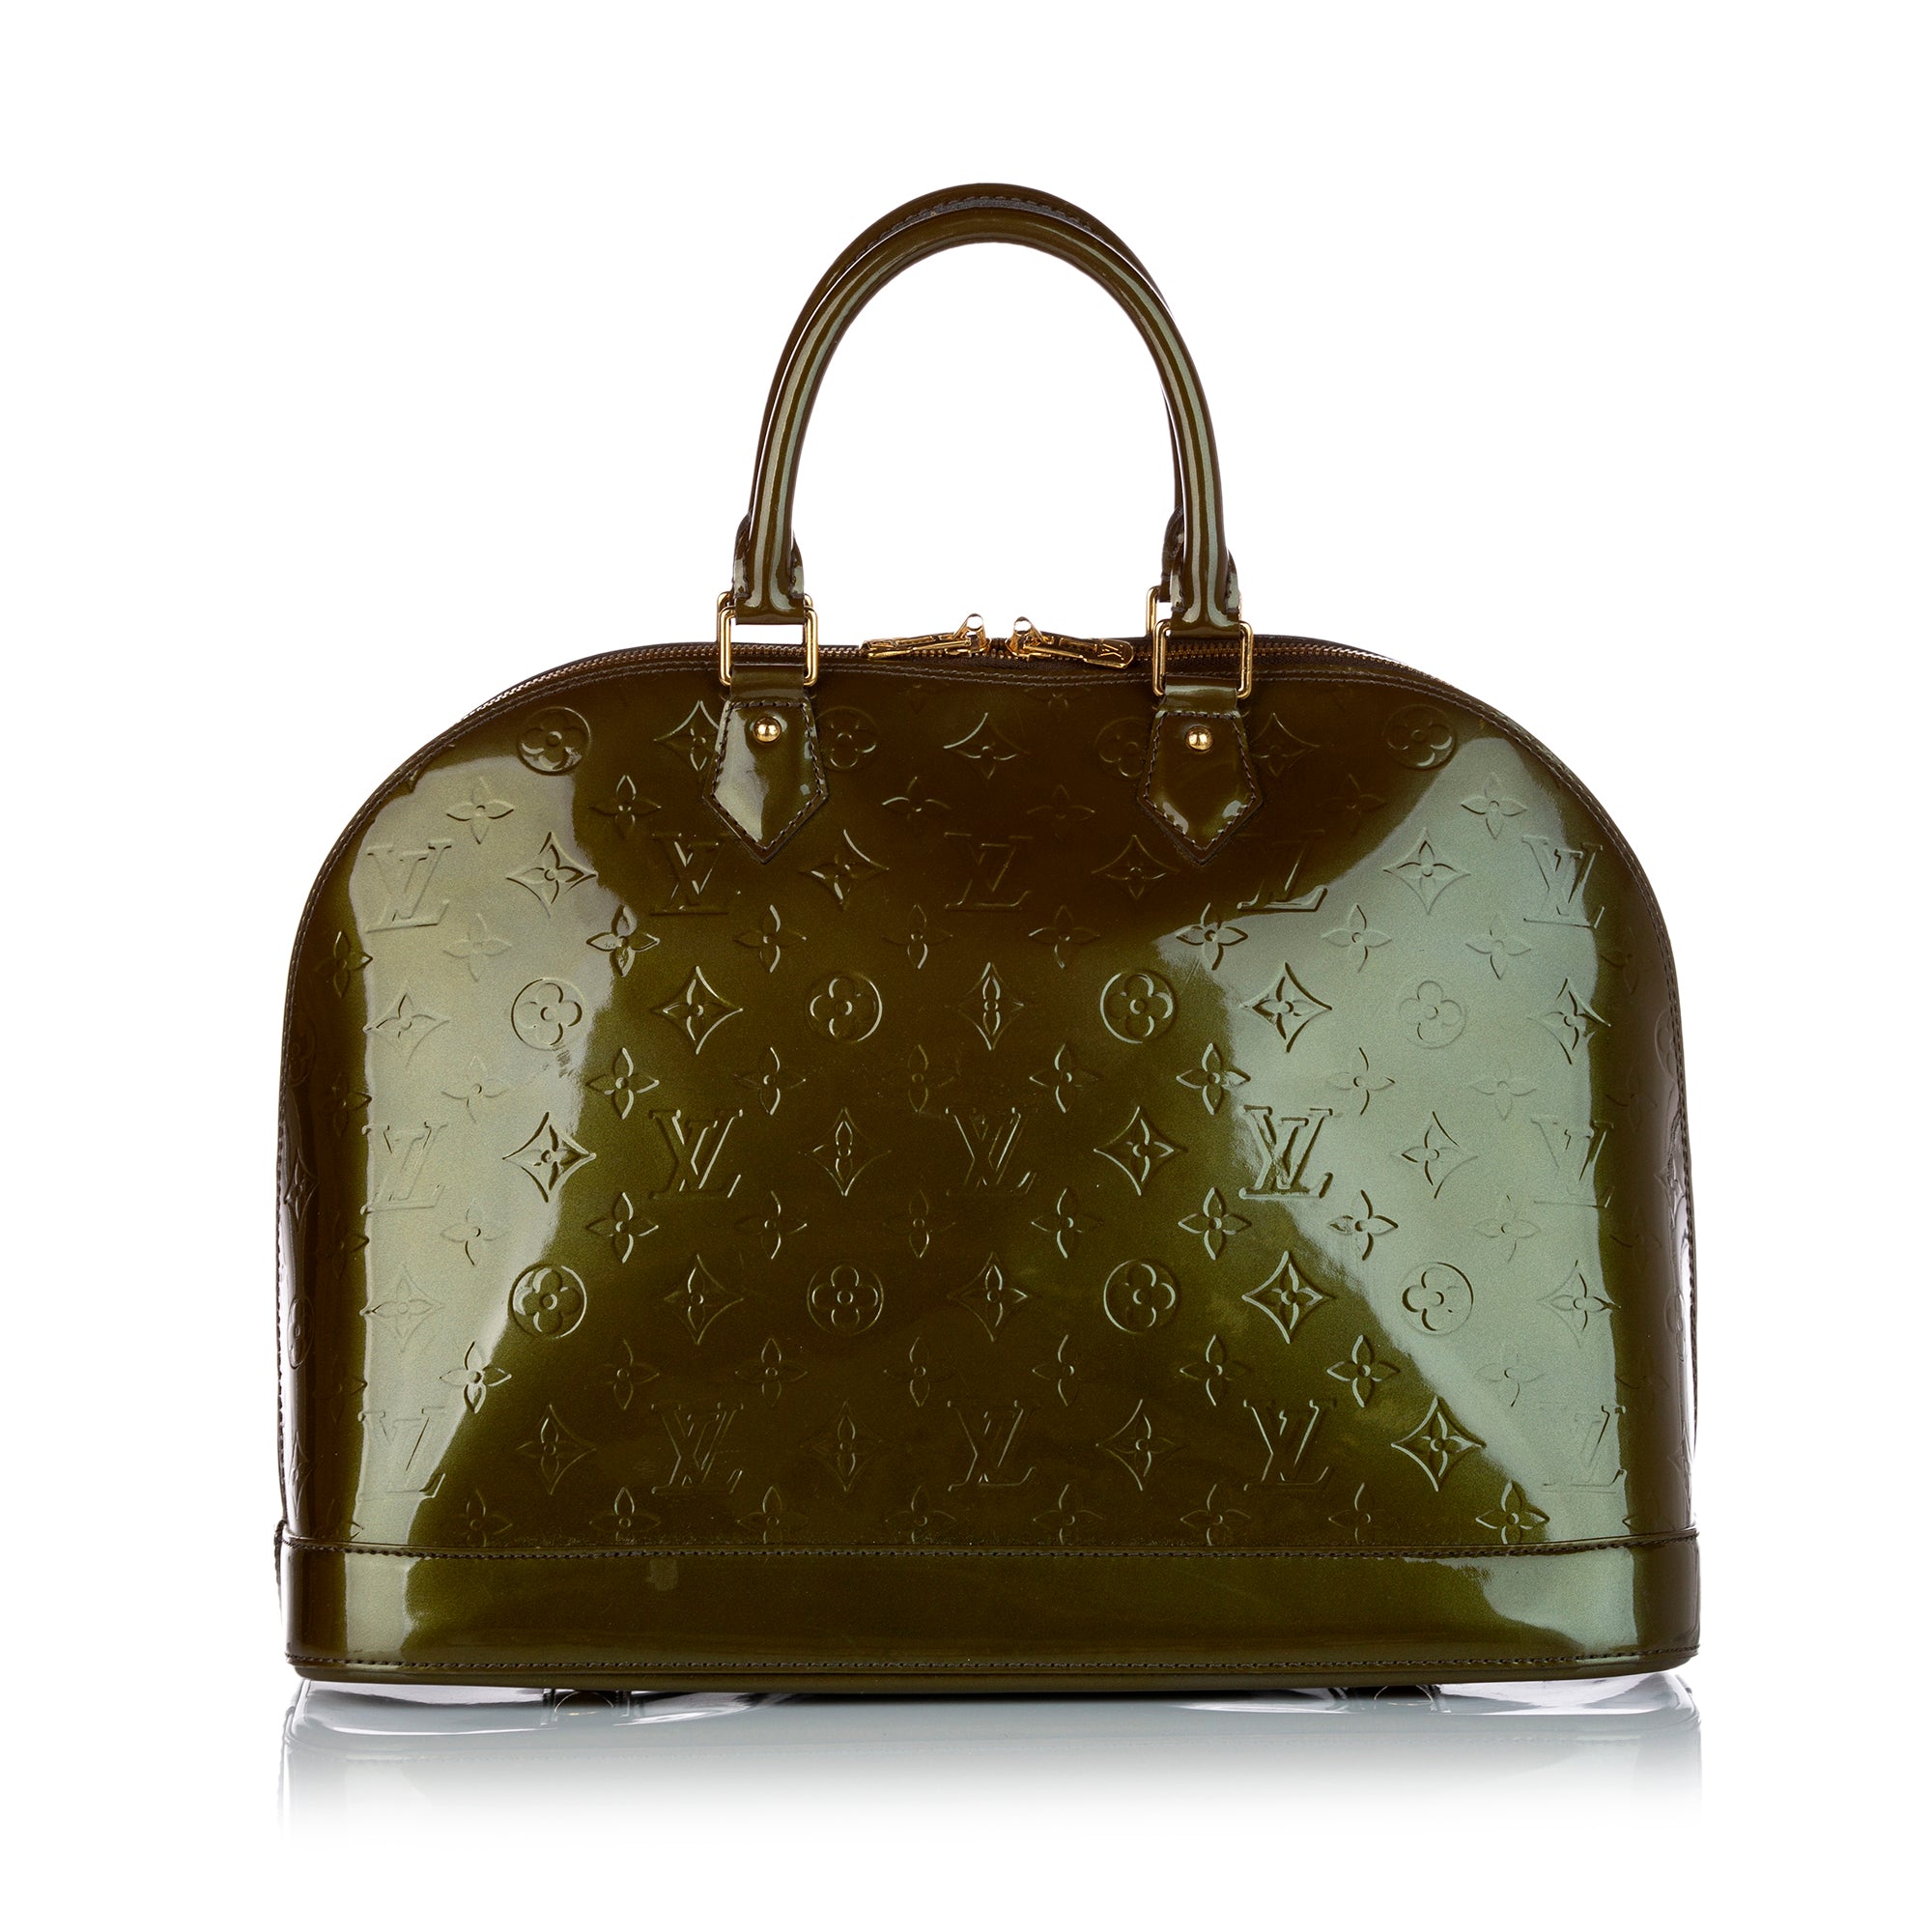 Louis Vuitton - Authenticated Alma Bb Handbag - Leather Green for Women, Very Good Condition